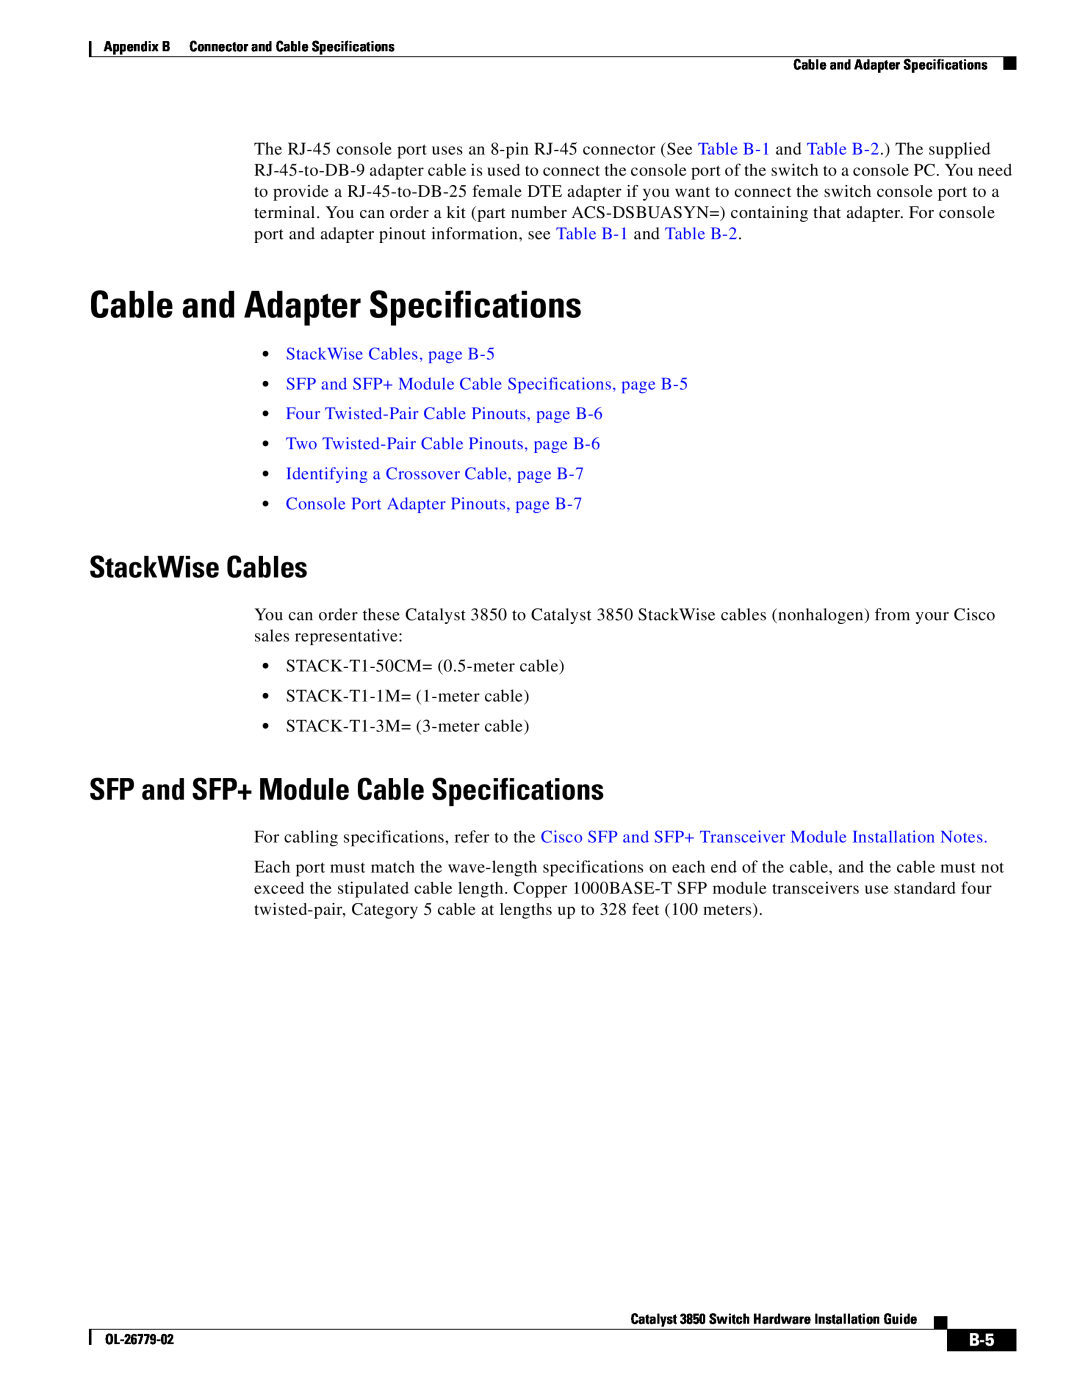 Cisco Systems C3850NM41G Cable and Adapter Specifications, StackWise Cables, SFP and SFP+ Module Cable Specifications 